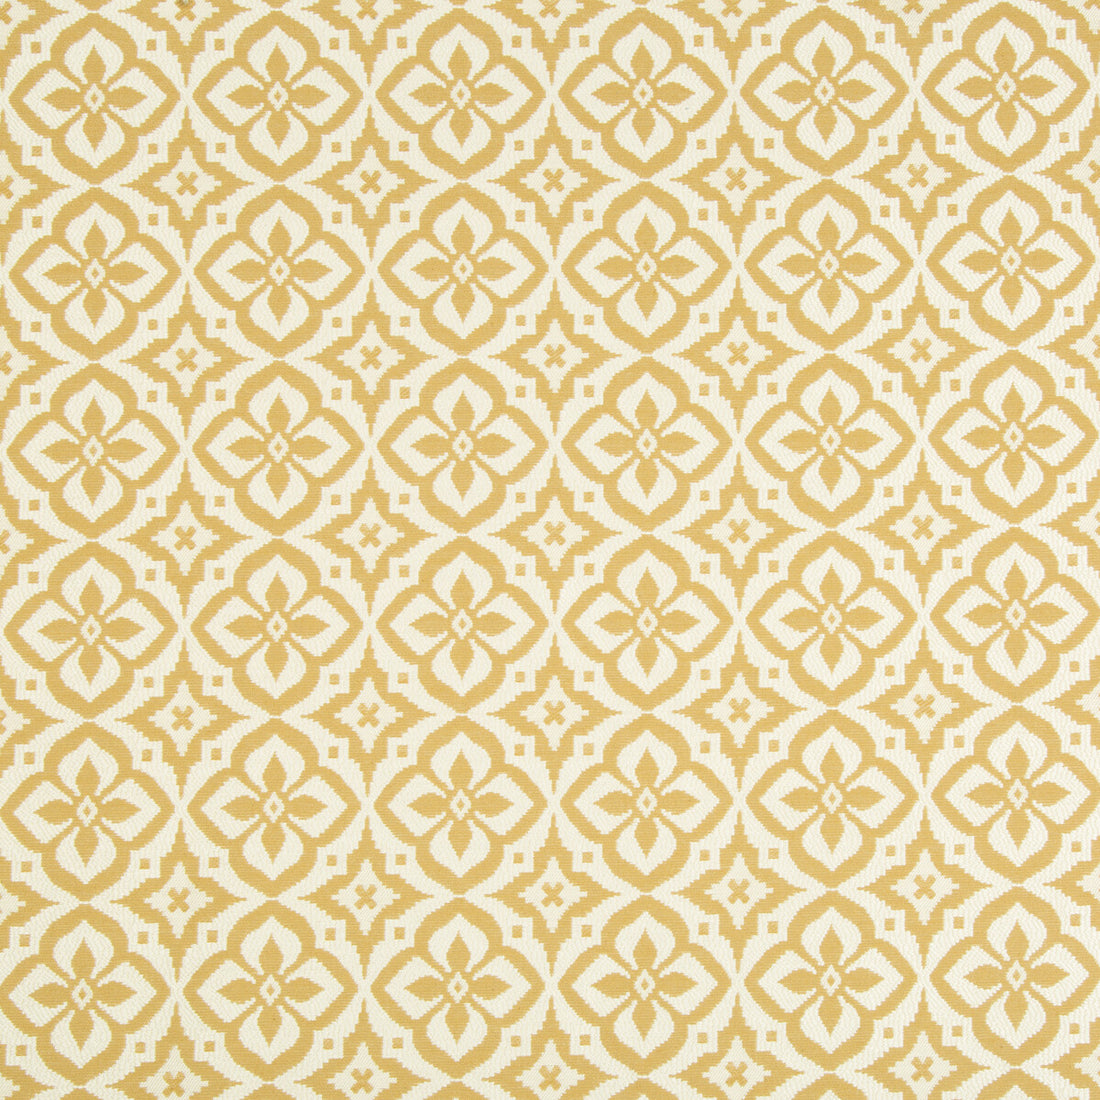 Kravet Contract fabric in 34757-16 color - pattern 34757.16.0 - by Kravet Contract in the Crypton Incase collection